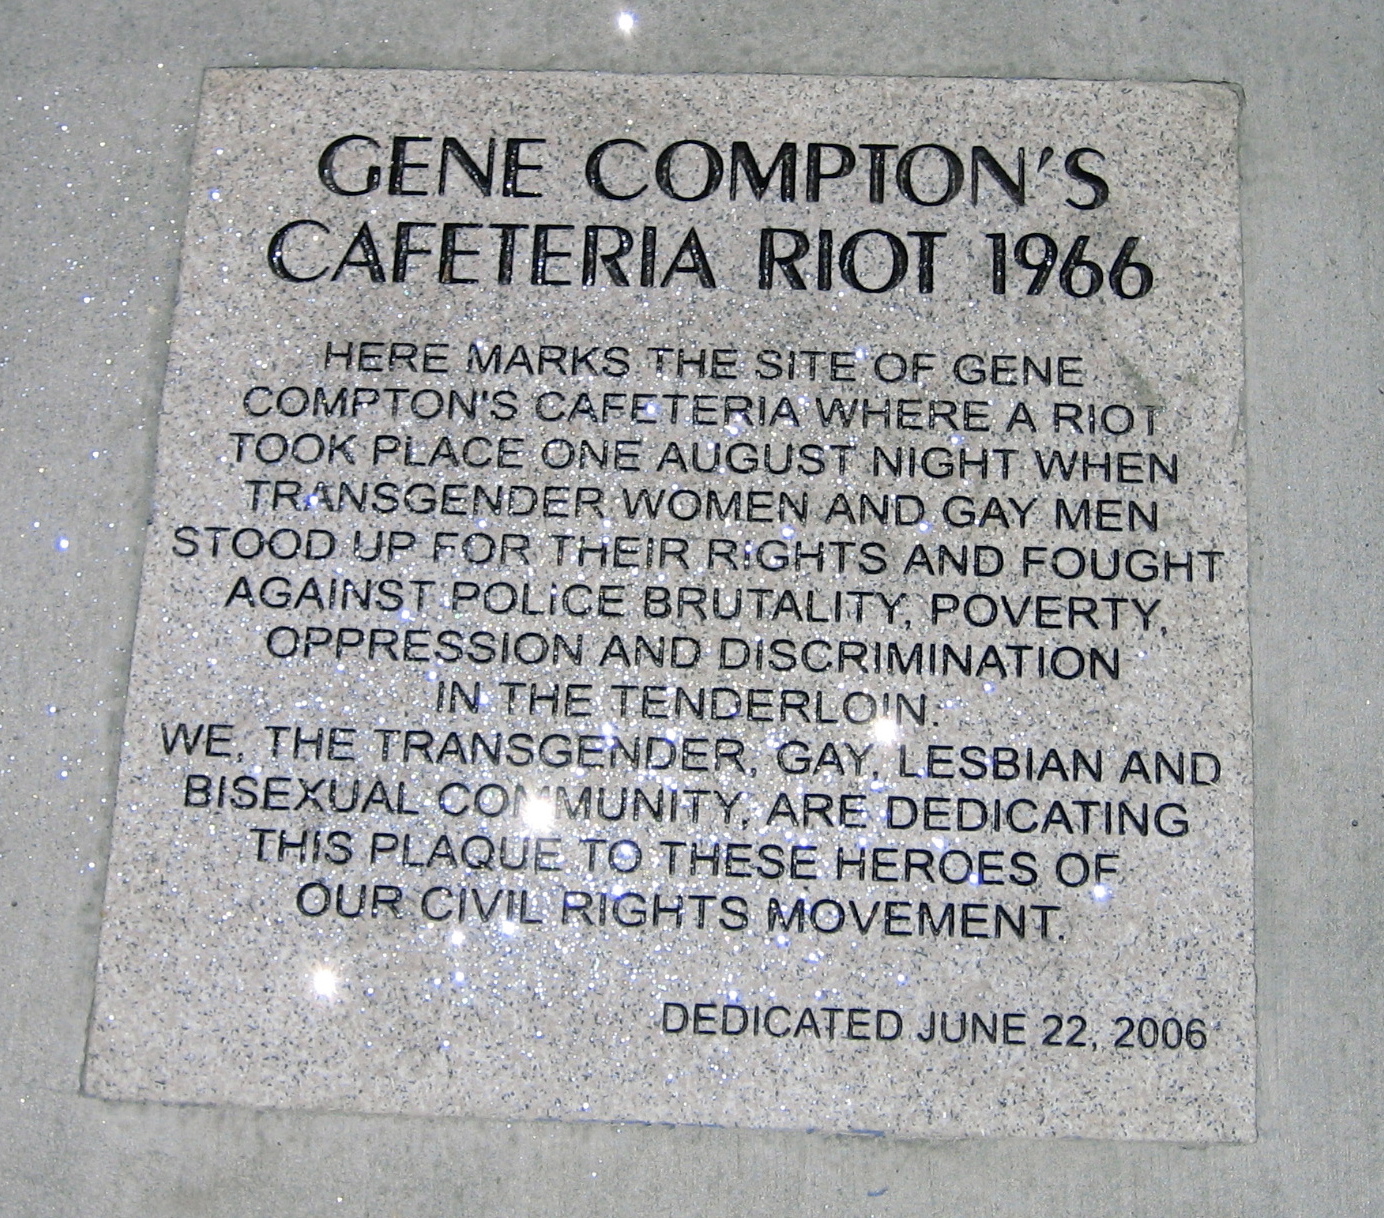  - comptons_cafeteria_riot01